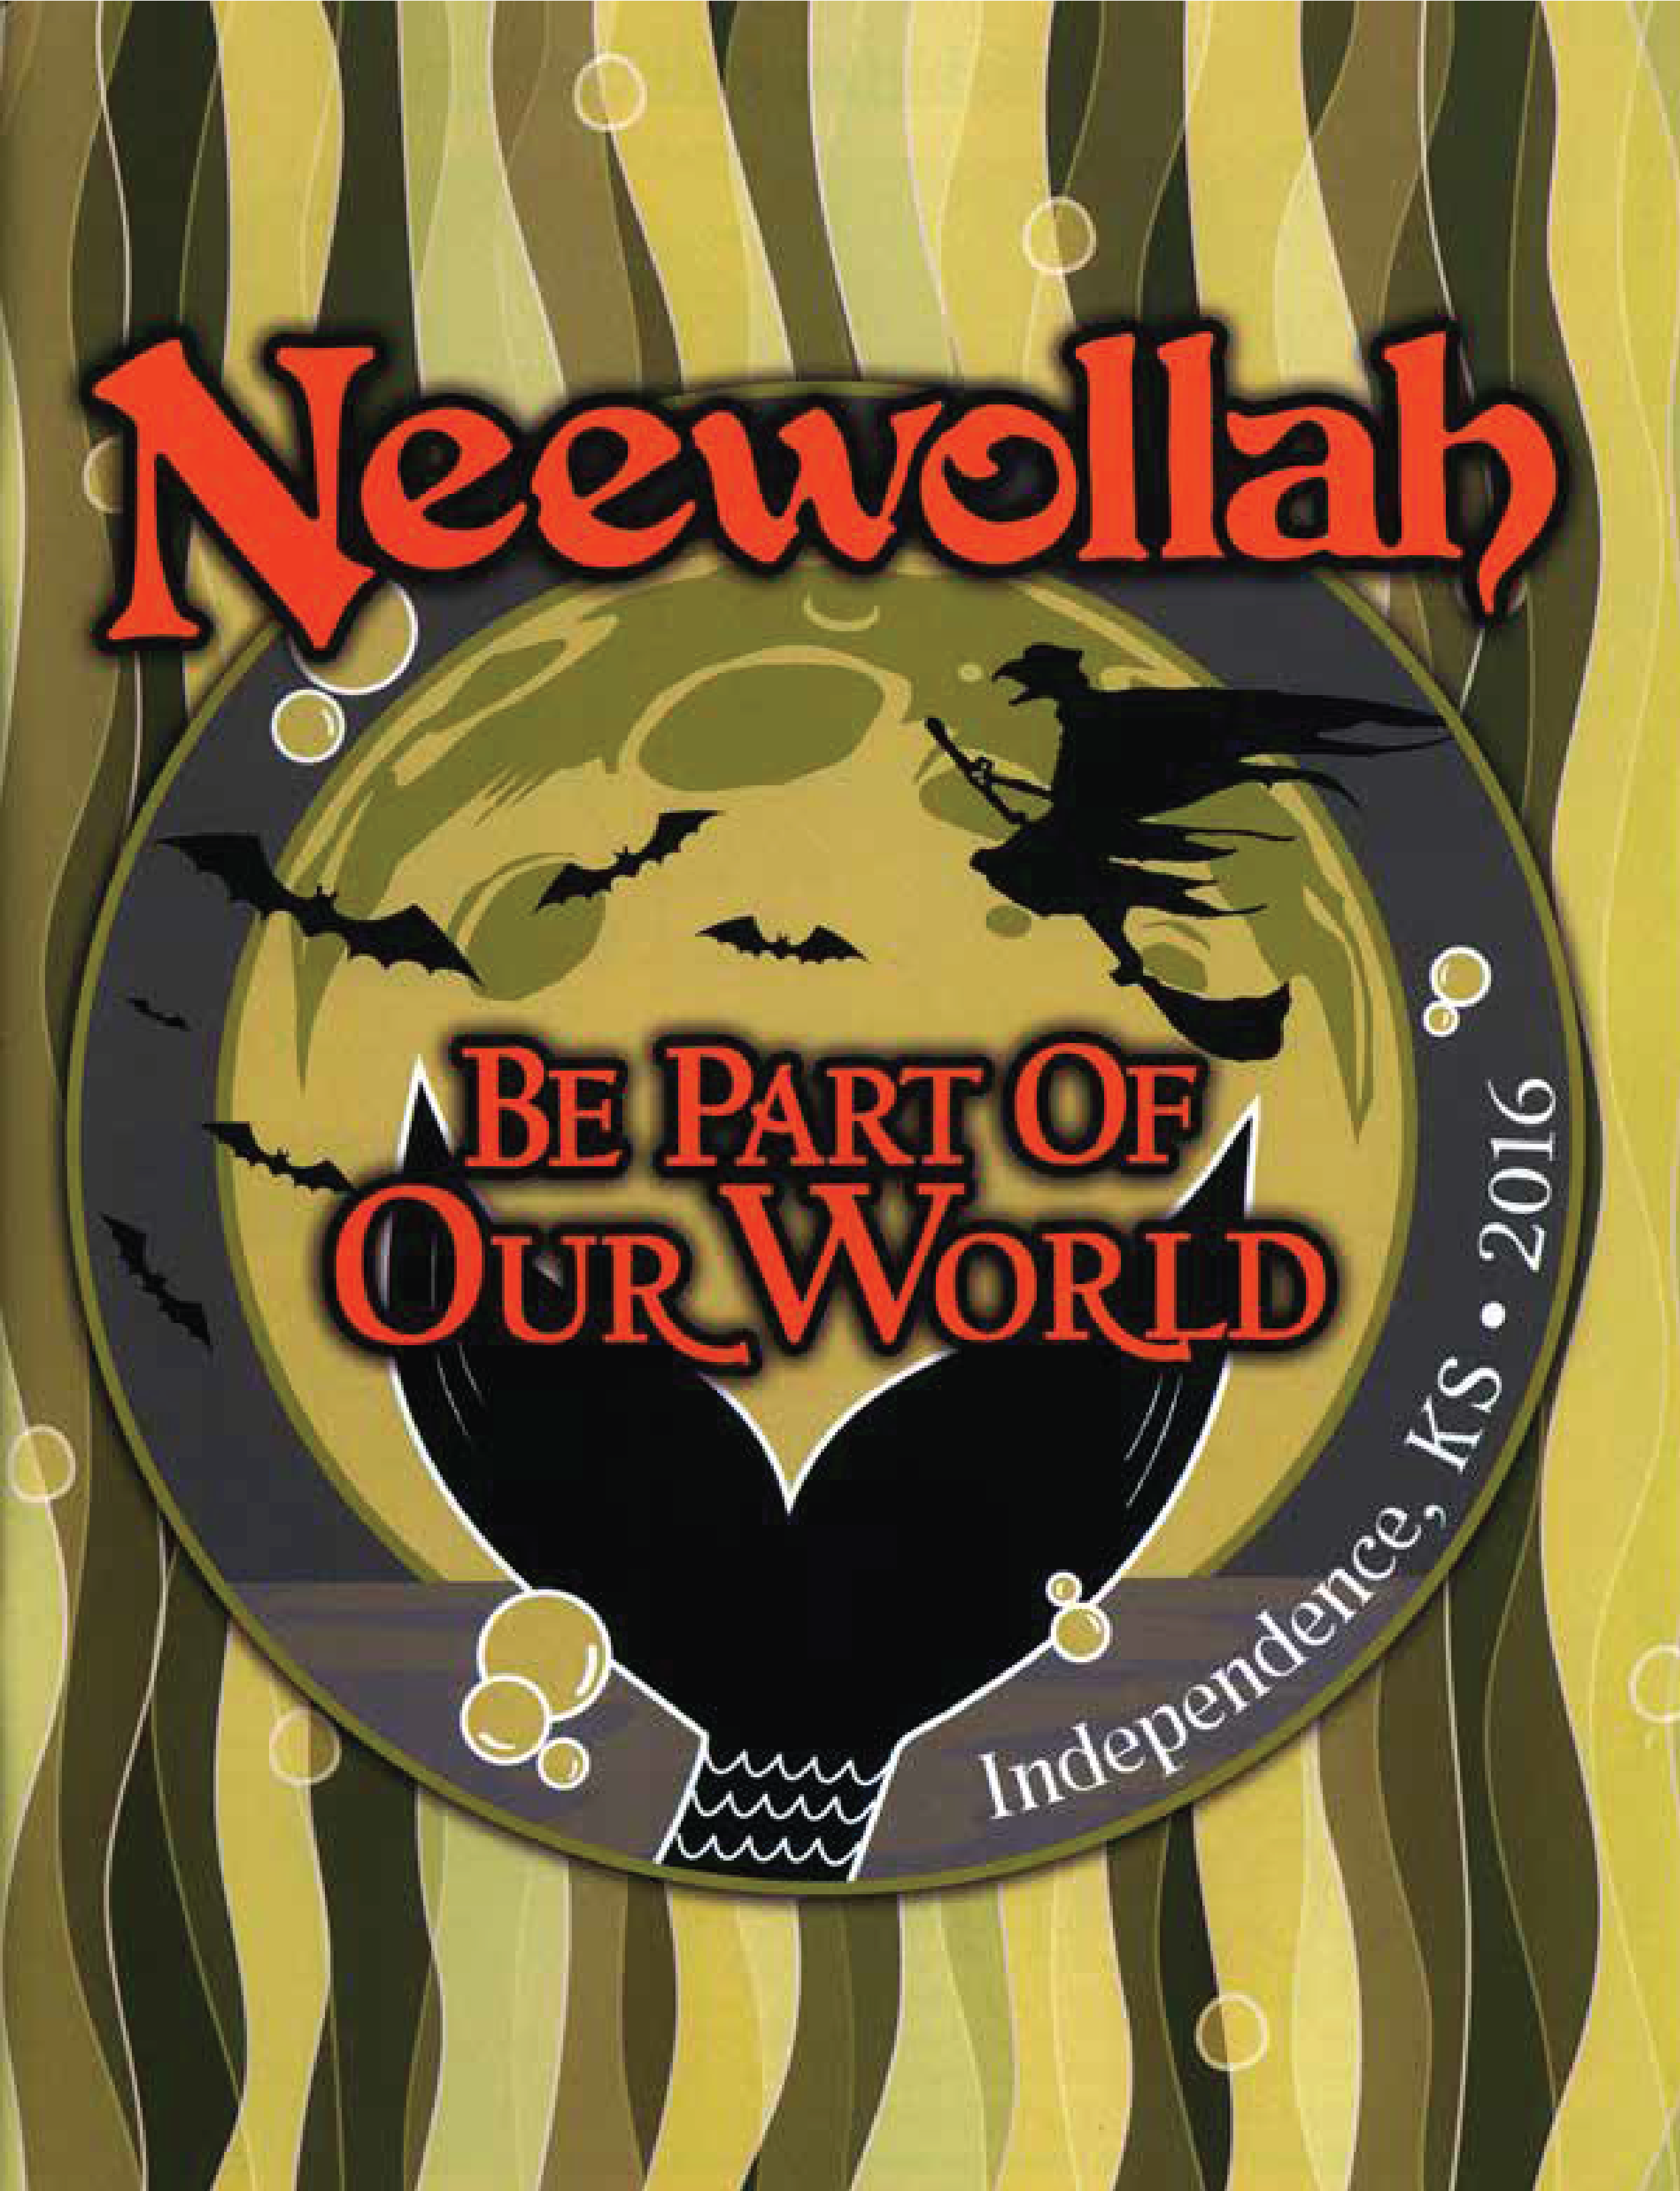 Neewollah 2016 Be Part of Our World